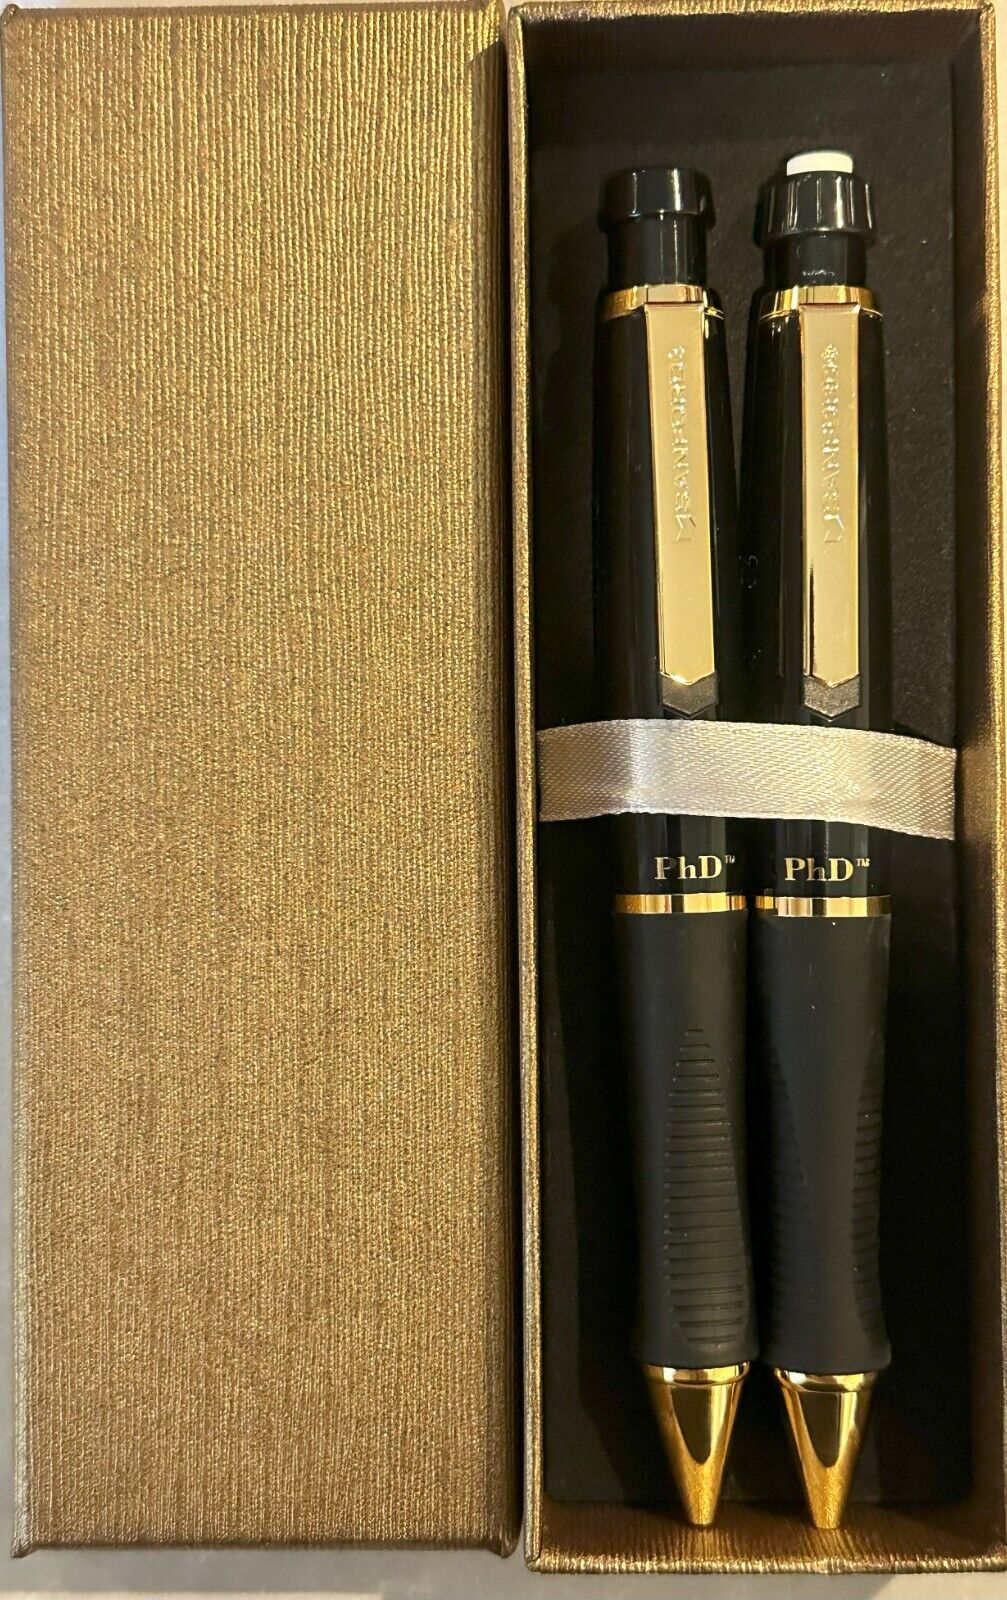 Sanford 18K Gold-Plated Gloss Black PhD Pen and Pencil Set -M/F Day Gift Idea